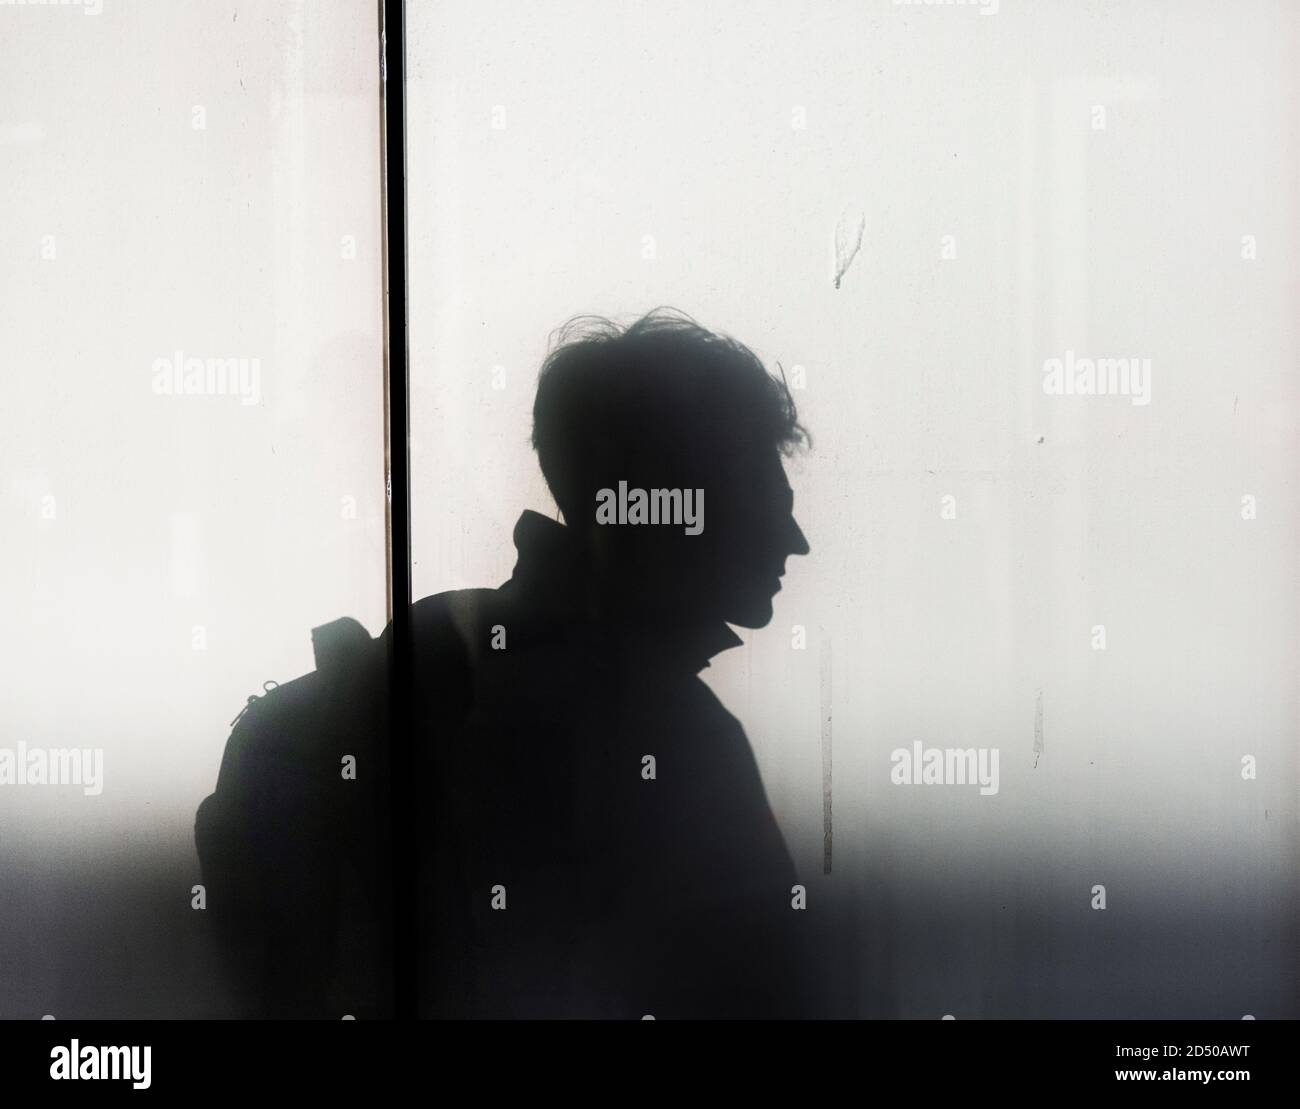 Silhouetted profile of a man through frosted glass Stock Photo